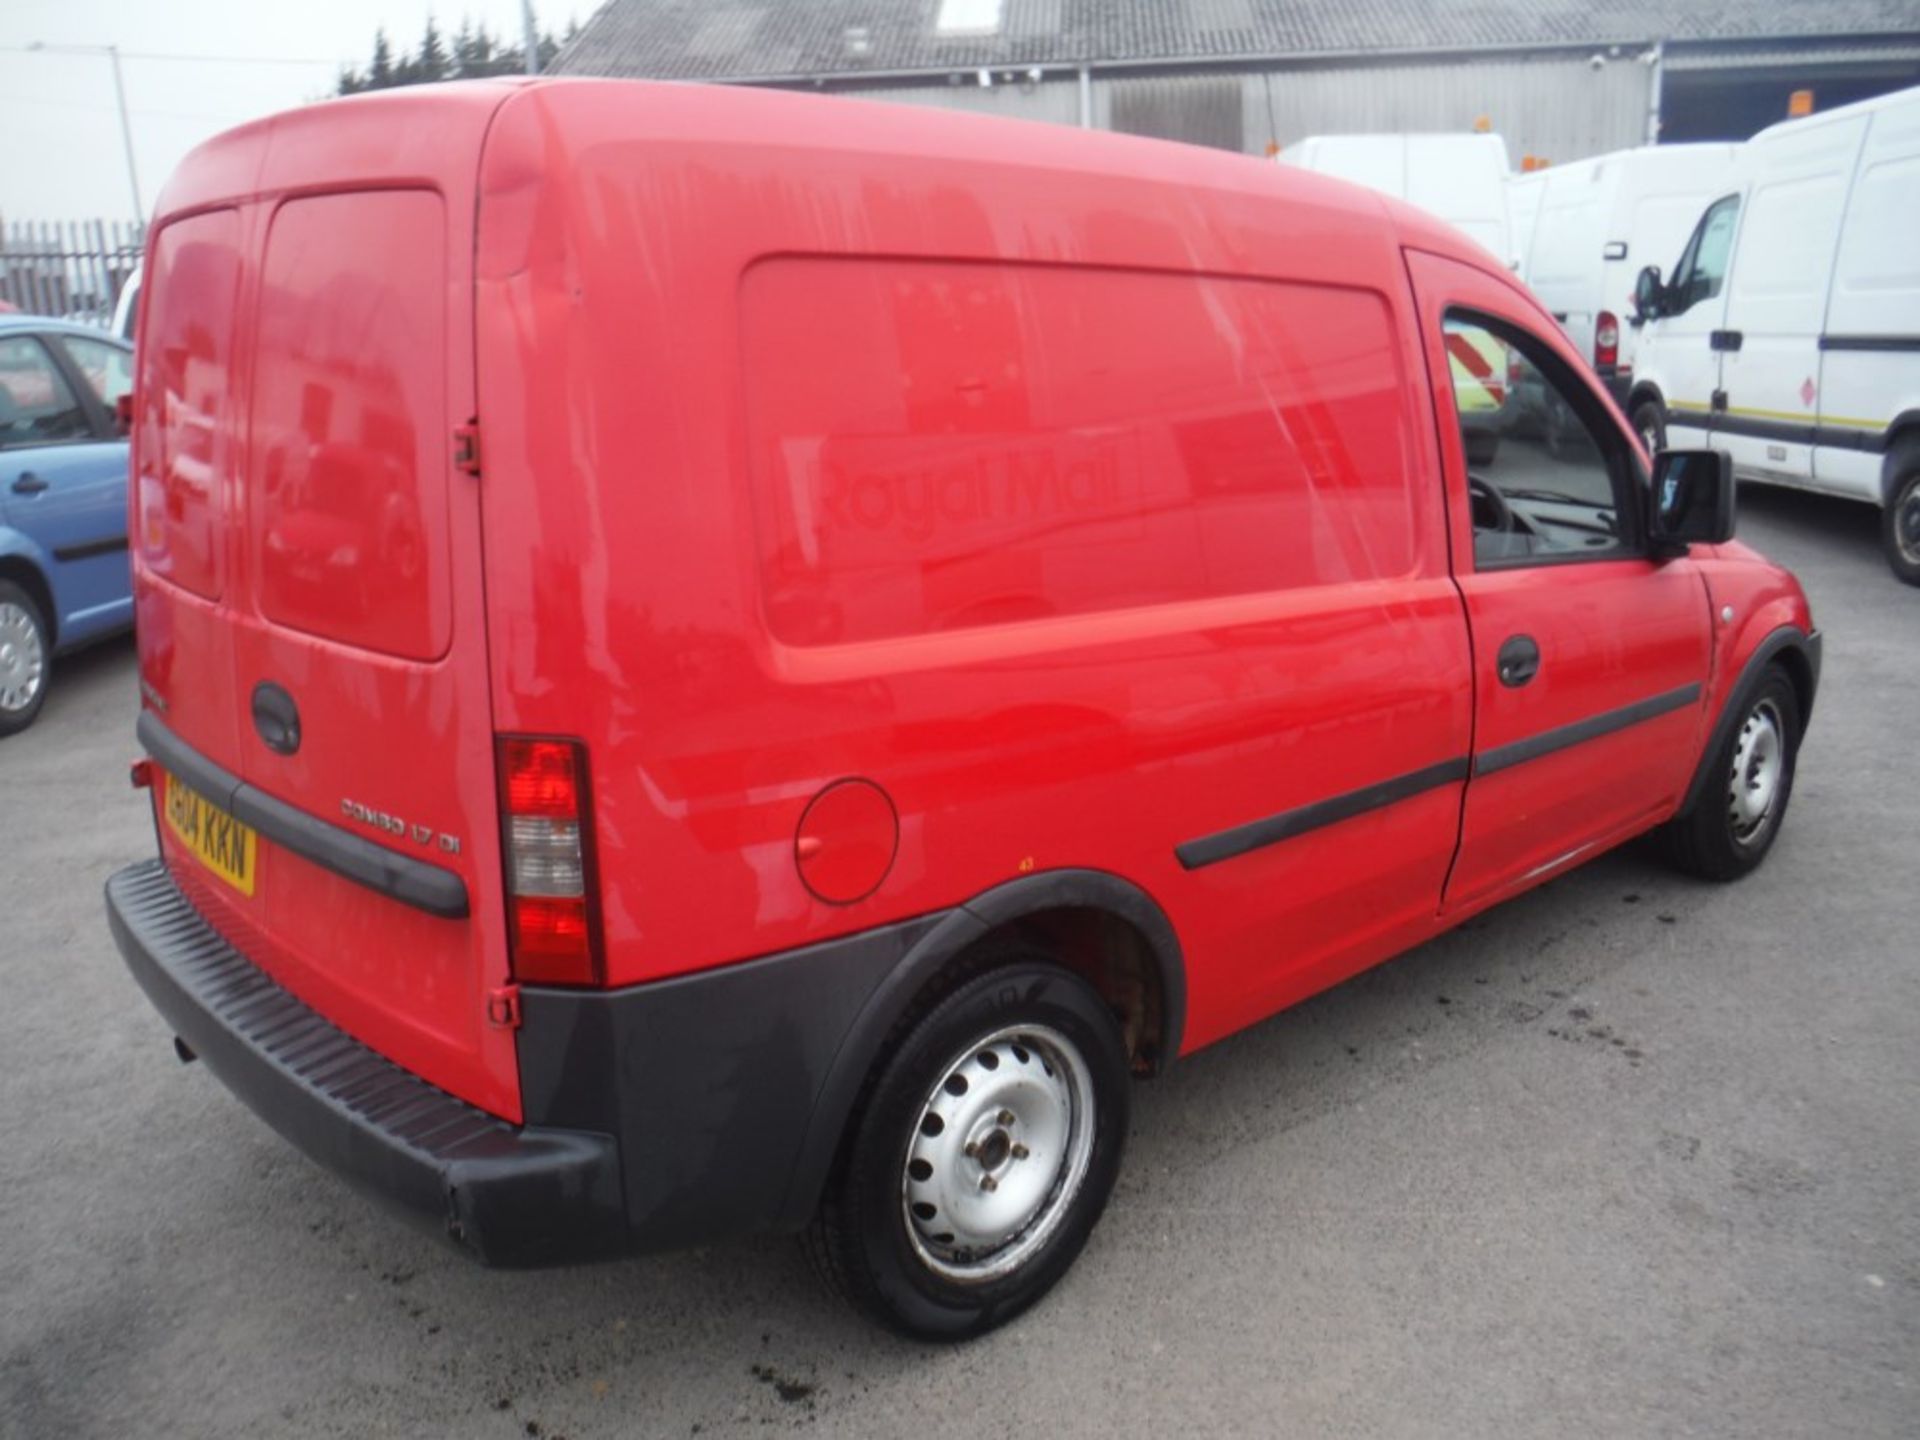 04 reg VAUXHALL COMBO 1700 DI VAN, 1ST REG 07/04, 78769M WARRANTED, V5 HERE, 1 OWNER FROM NEW [+ - Image 4 of 5